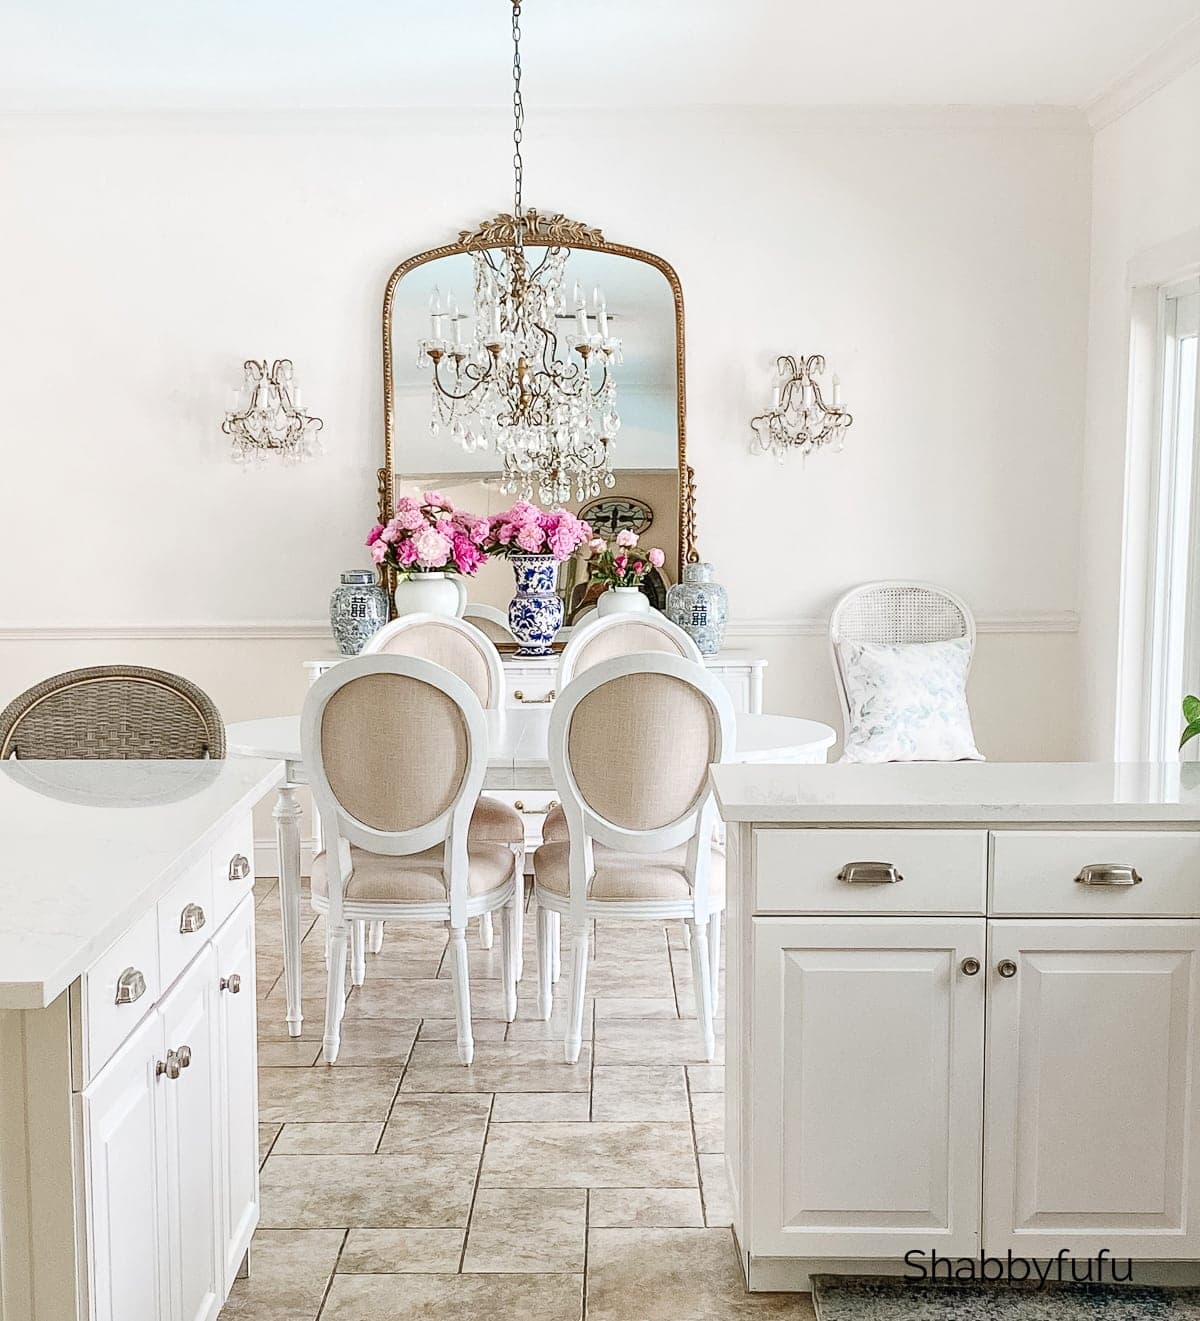 How To Apply Symmetry To Your Rooms | The Style Showcase 124